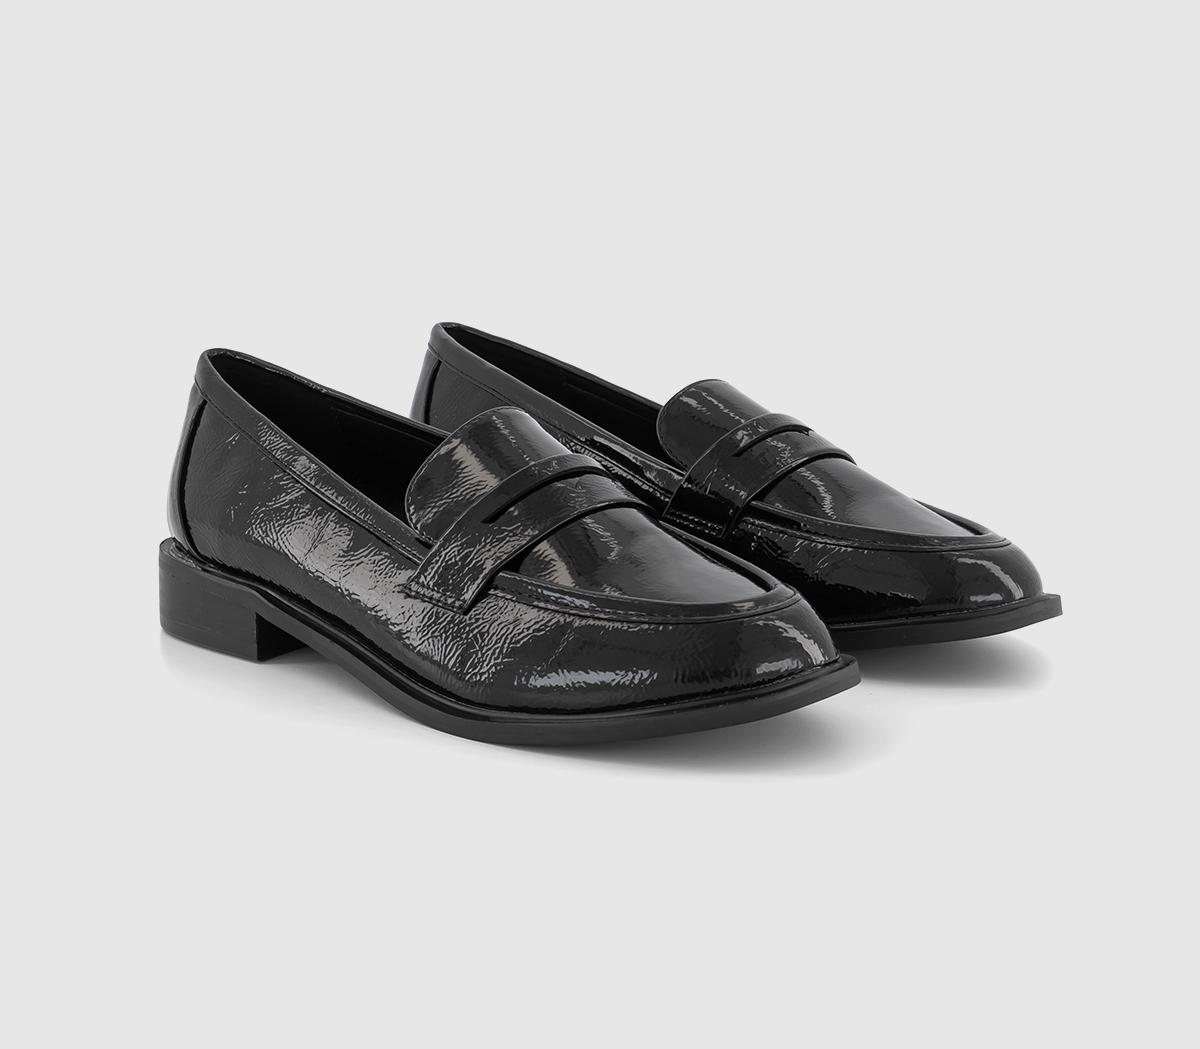 OFFICE Flaming Penny Loafers Black Patent, 5